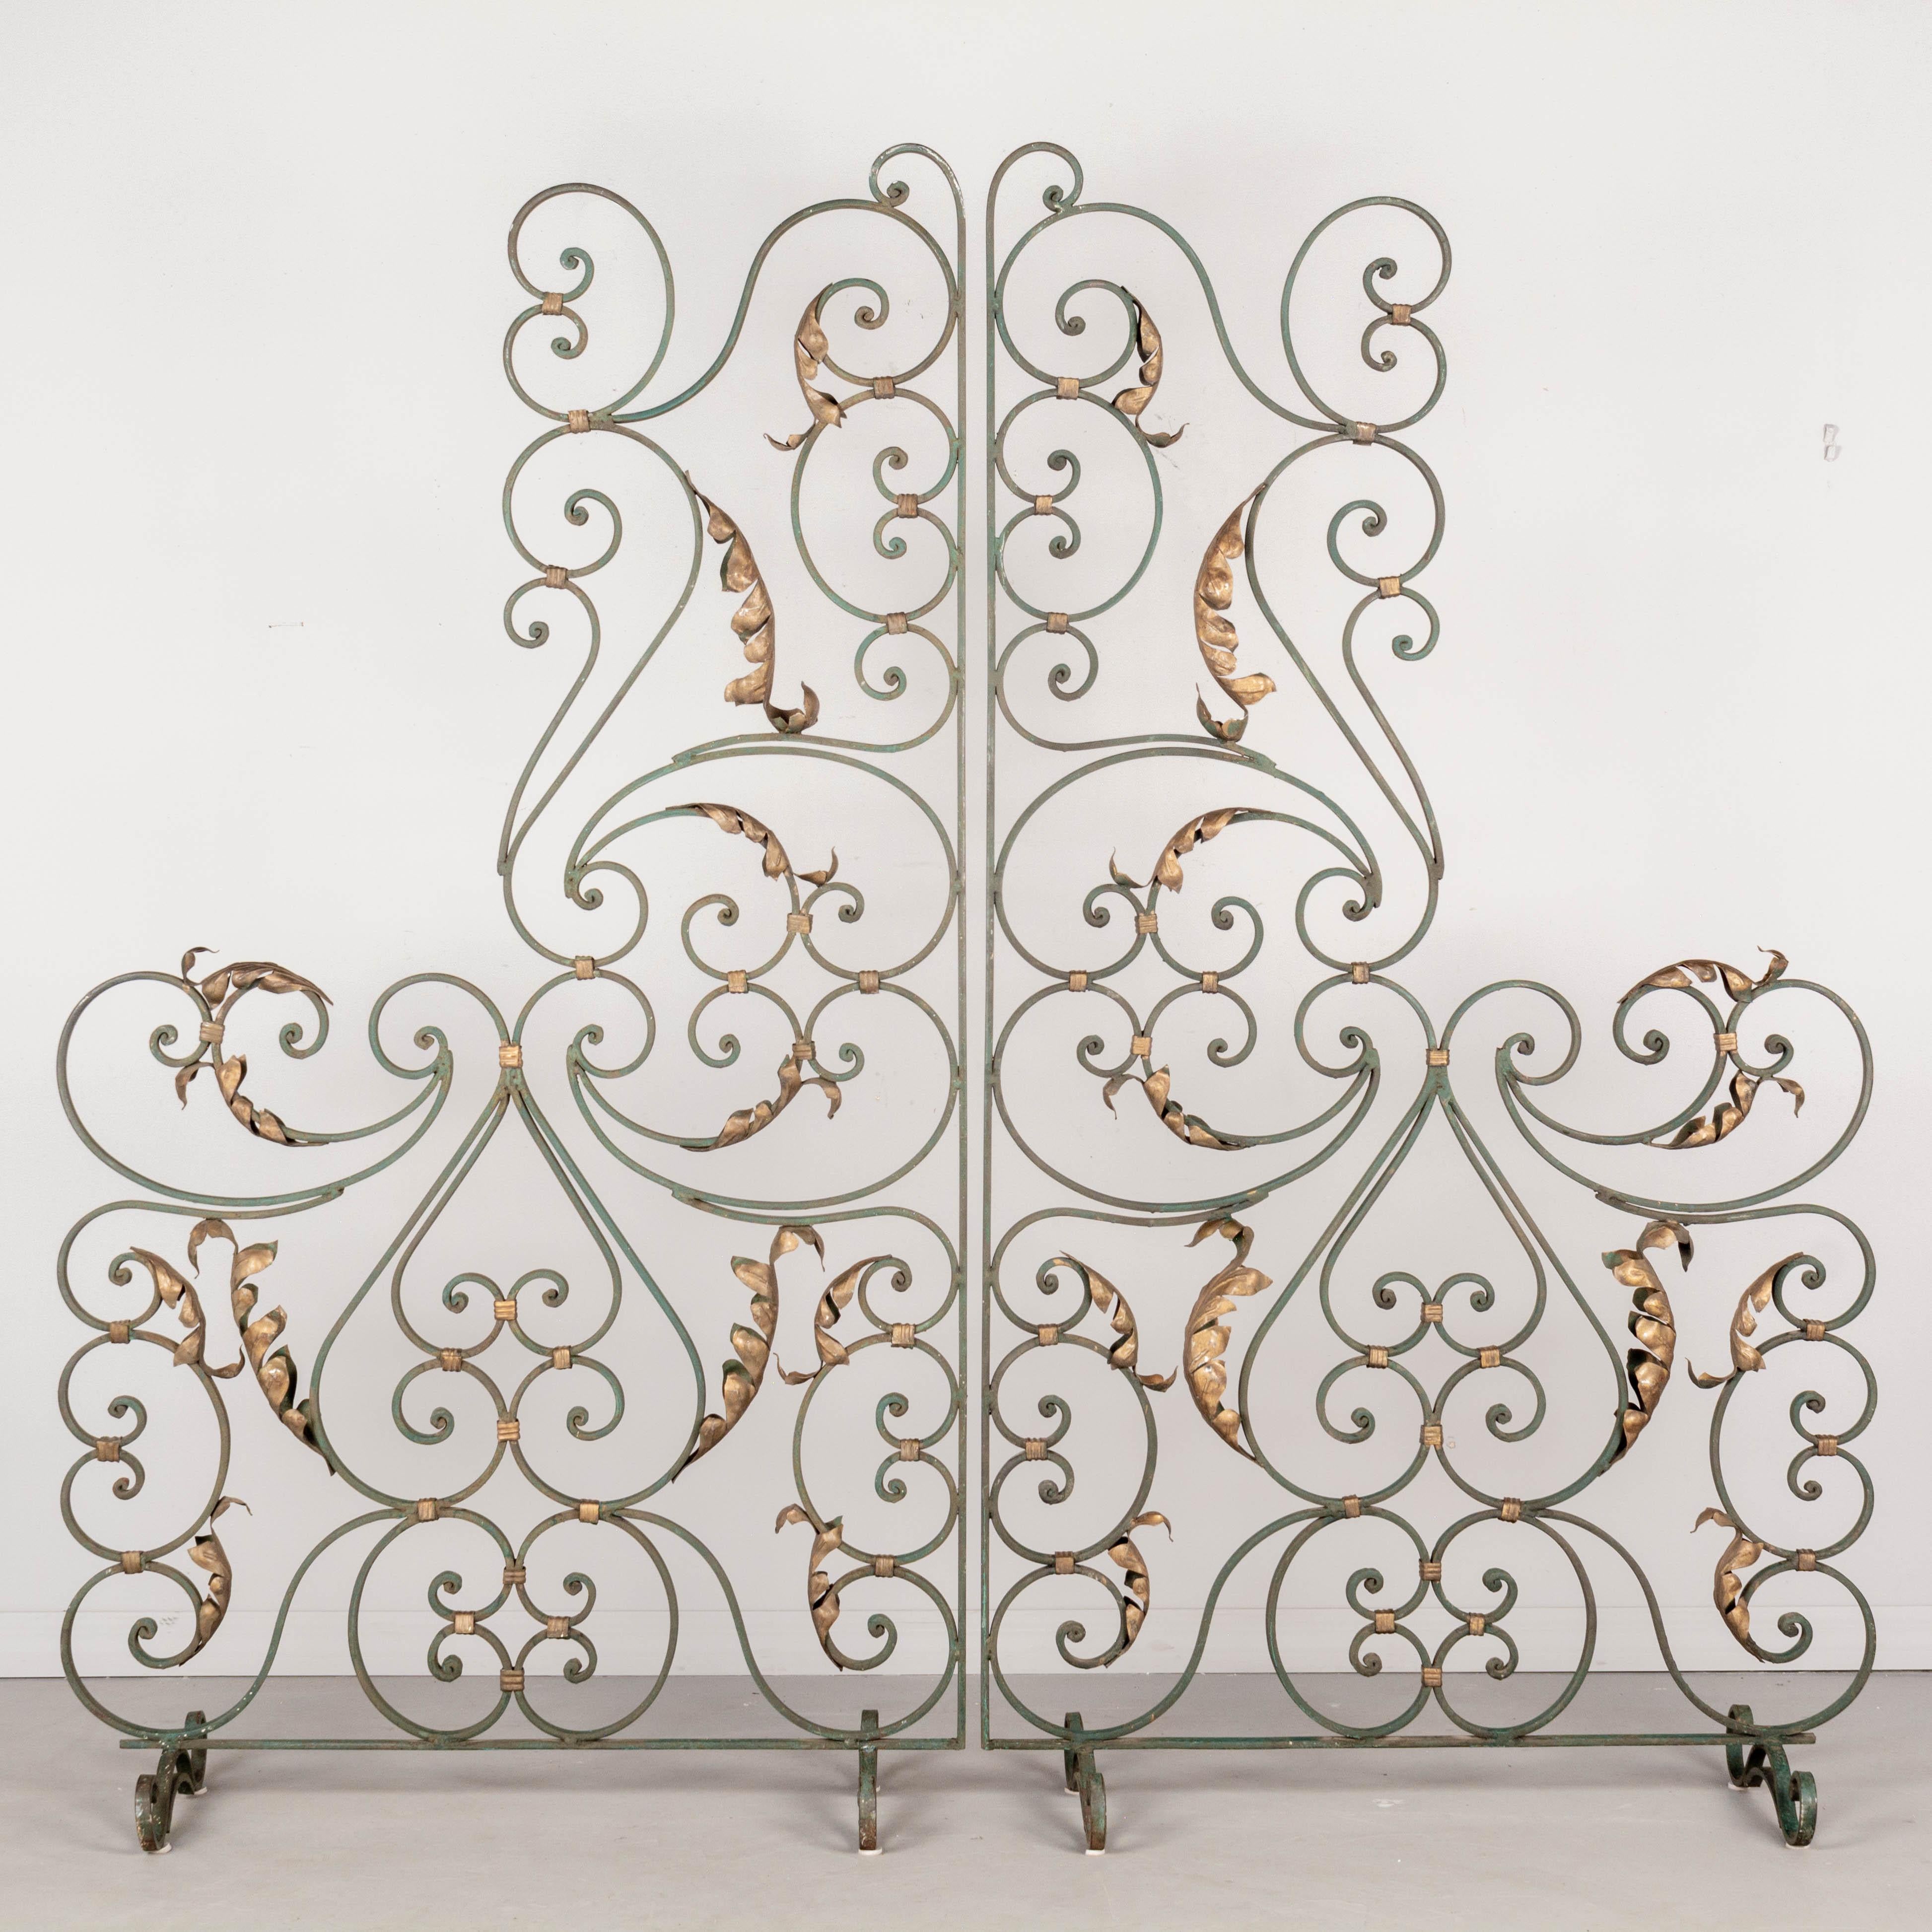 20th Century Pair of French Wrought Iron Screens or Room Dividers For Sale